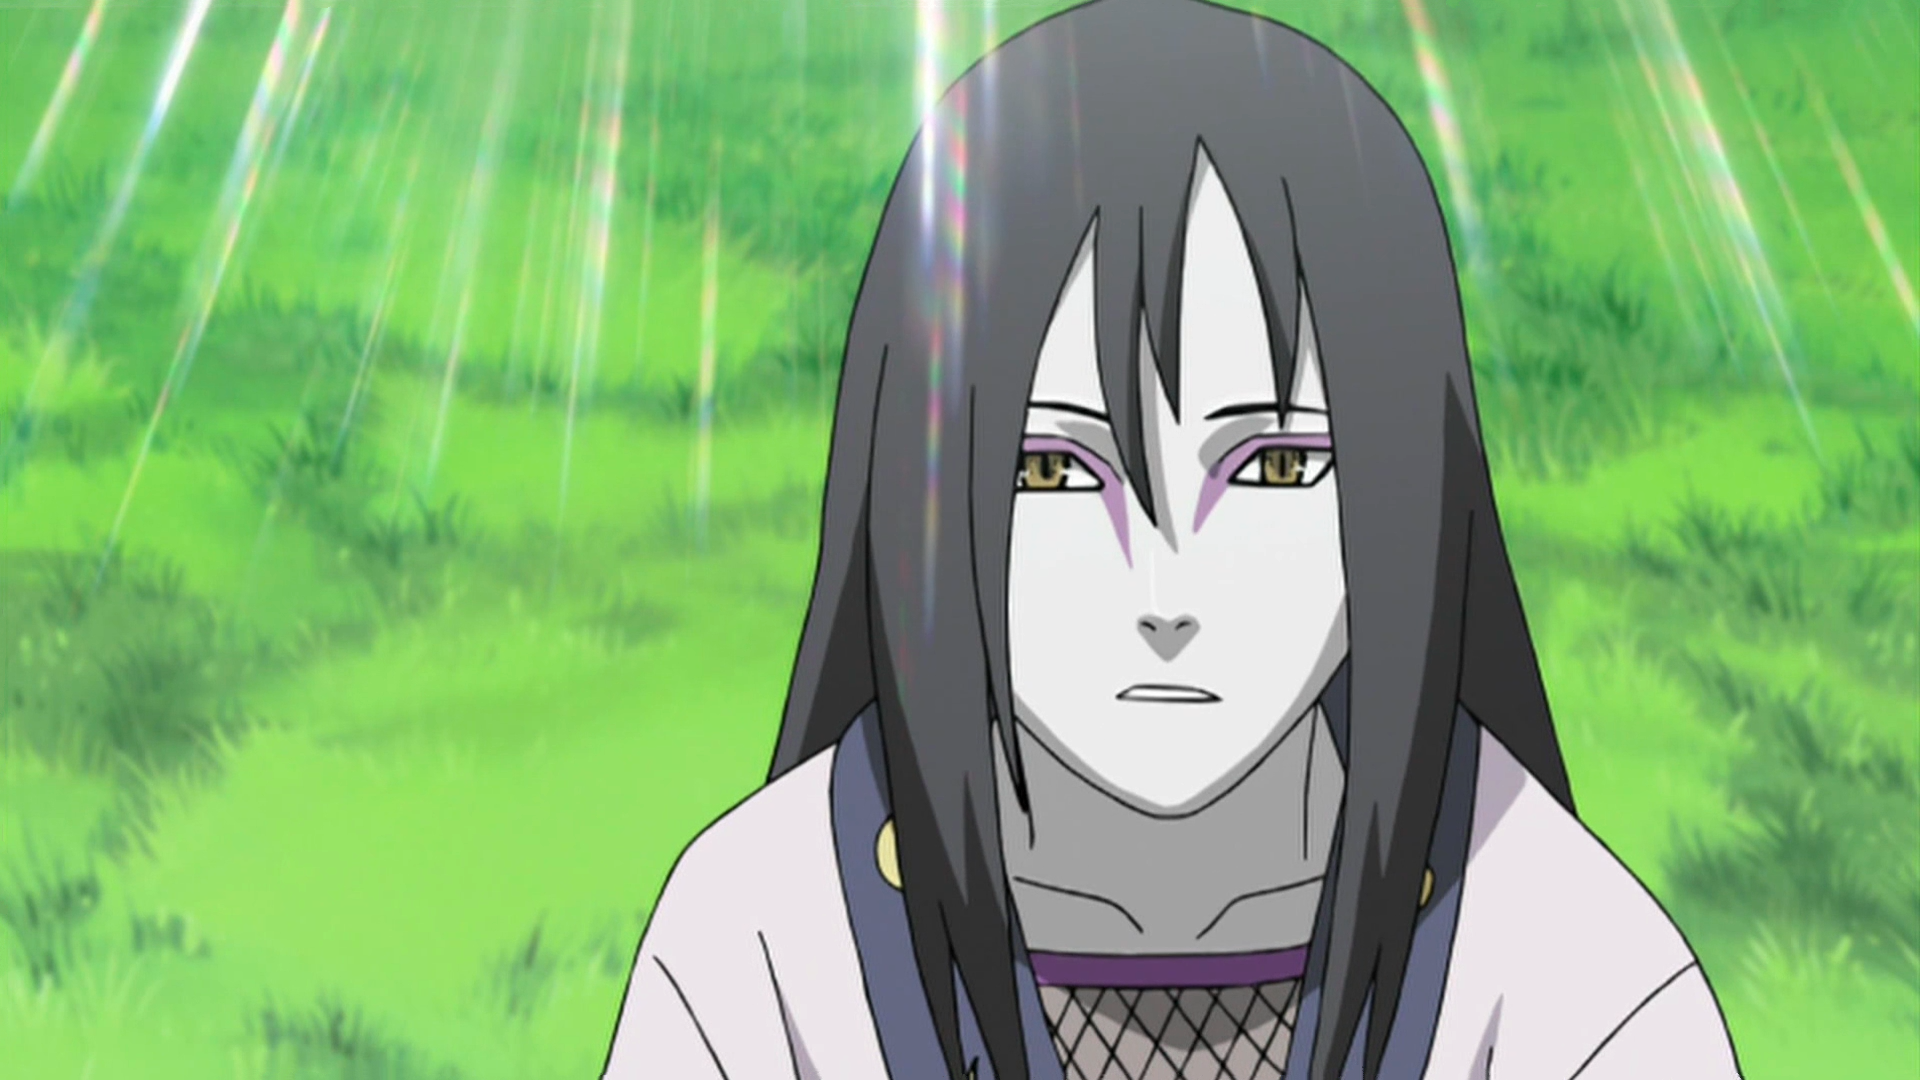 Why when Orochimaru fought the 3rd hokage, the anbu that were outside the  barrier didnt build a barrier on top of it so non of them could escape once  they dropped it?